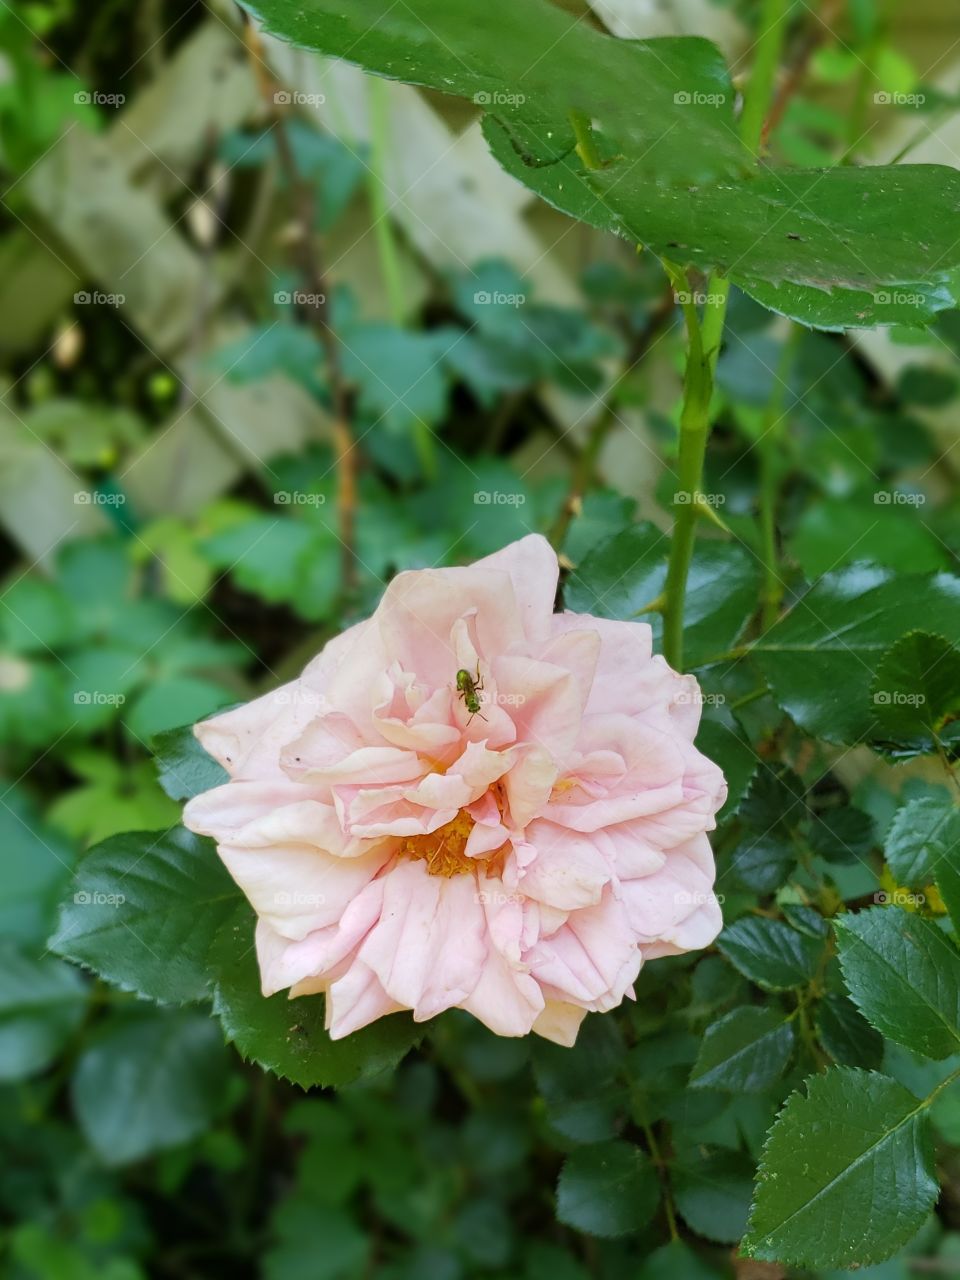 Insect pollinating a pale pink rose.